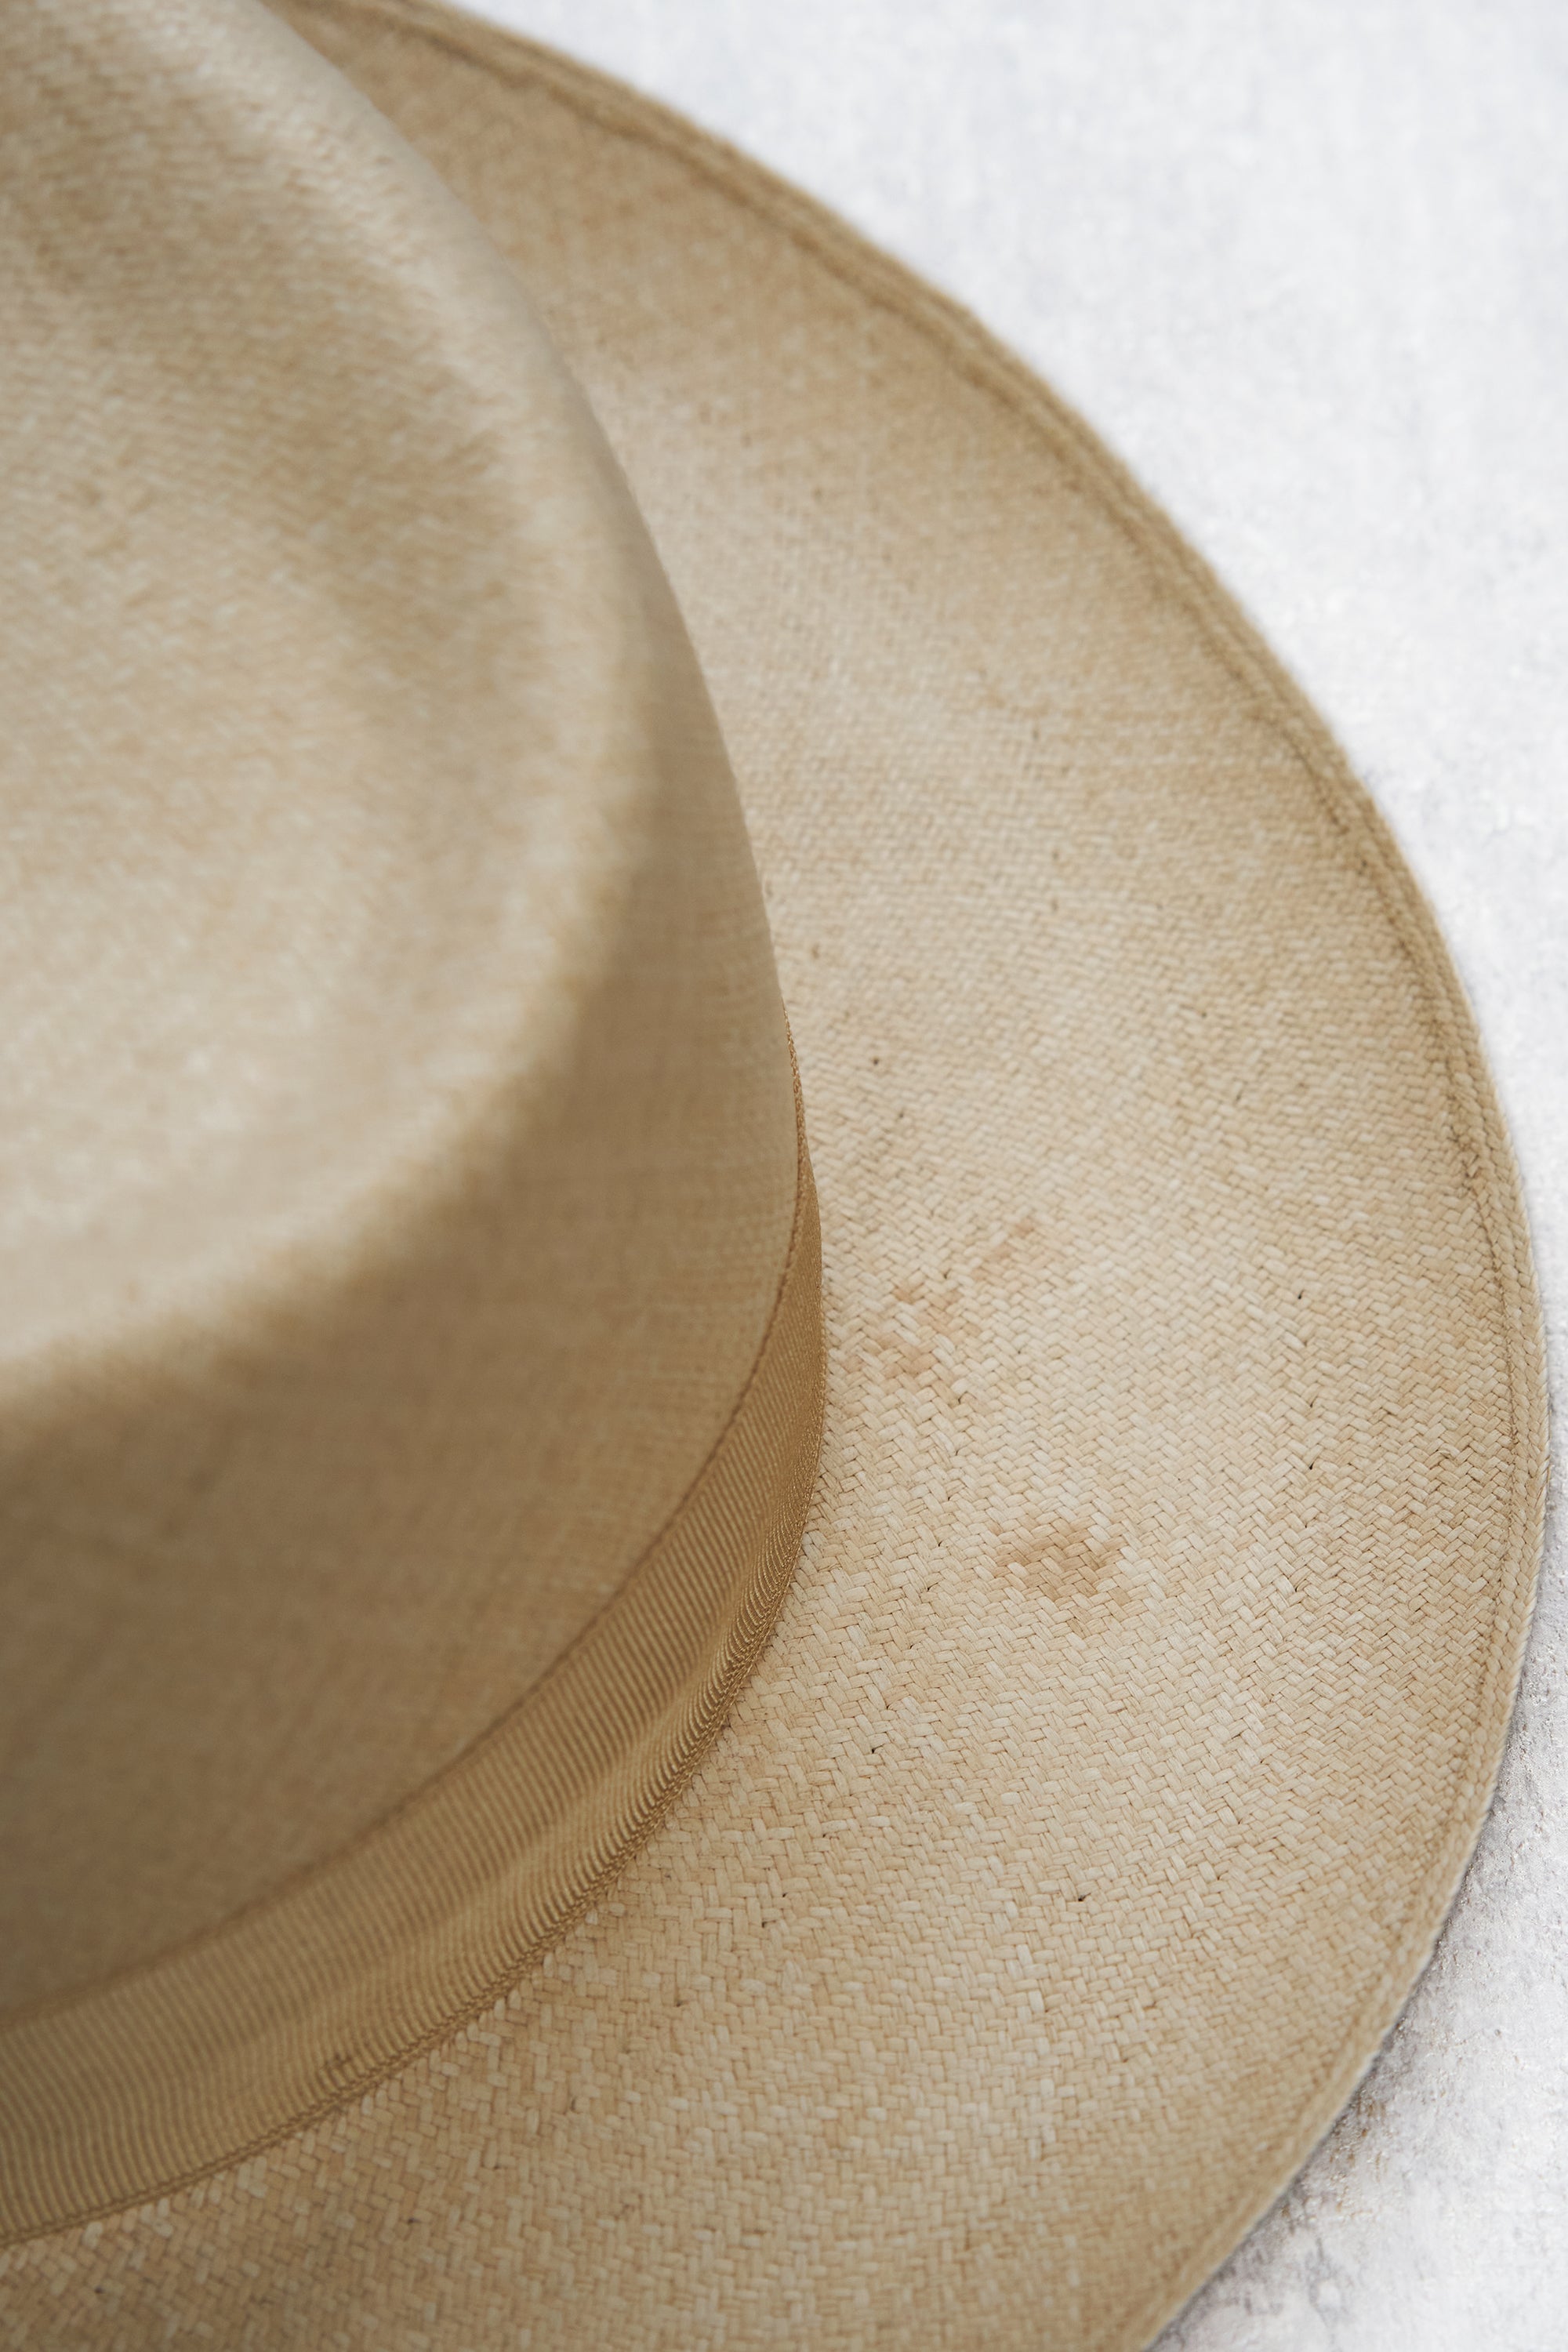 The Armoury Montecristi Panama Hat Old Hood *new with defect *